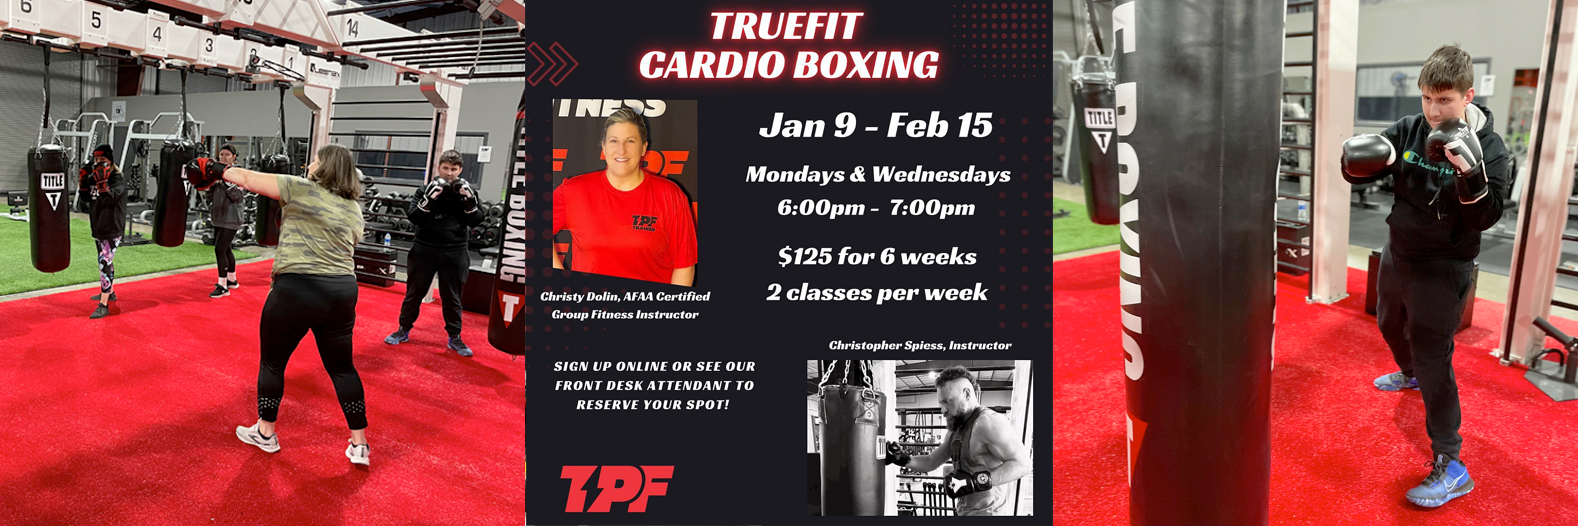 Monday and Wednesday 6PM Classes for TrueFit Cardio Boxing, taught by Christy Dolin